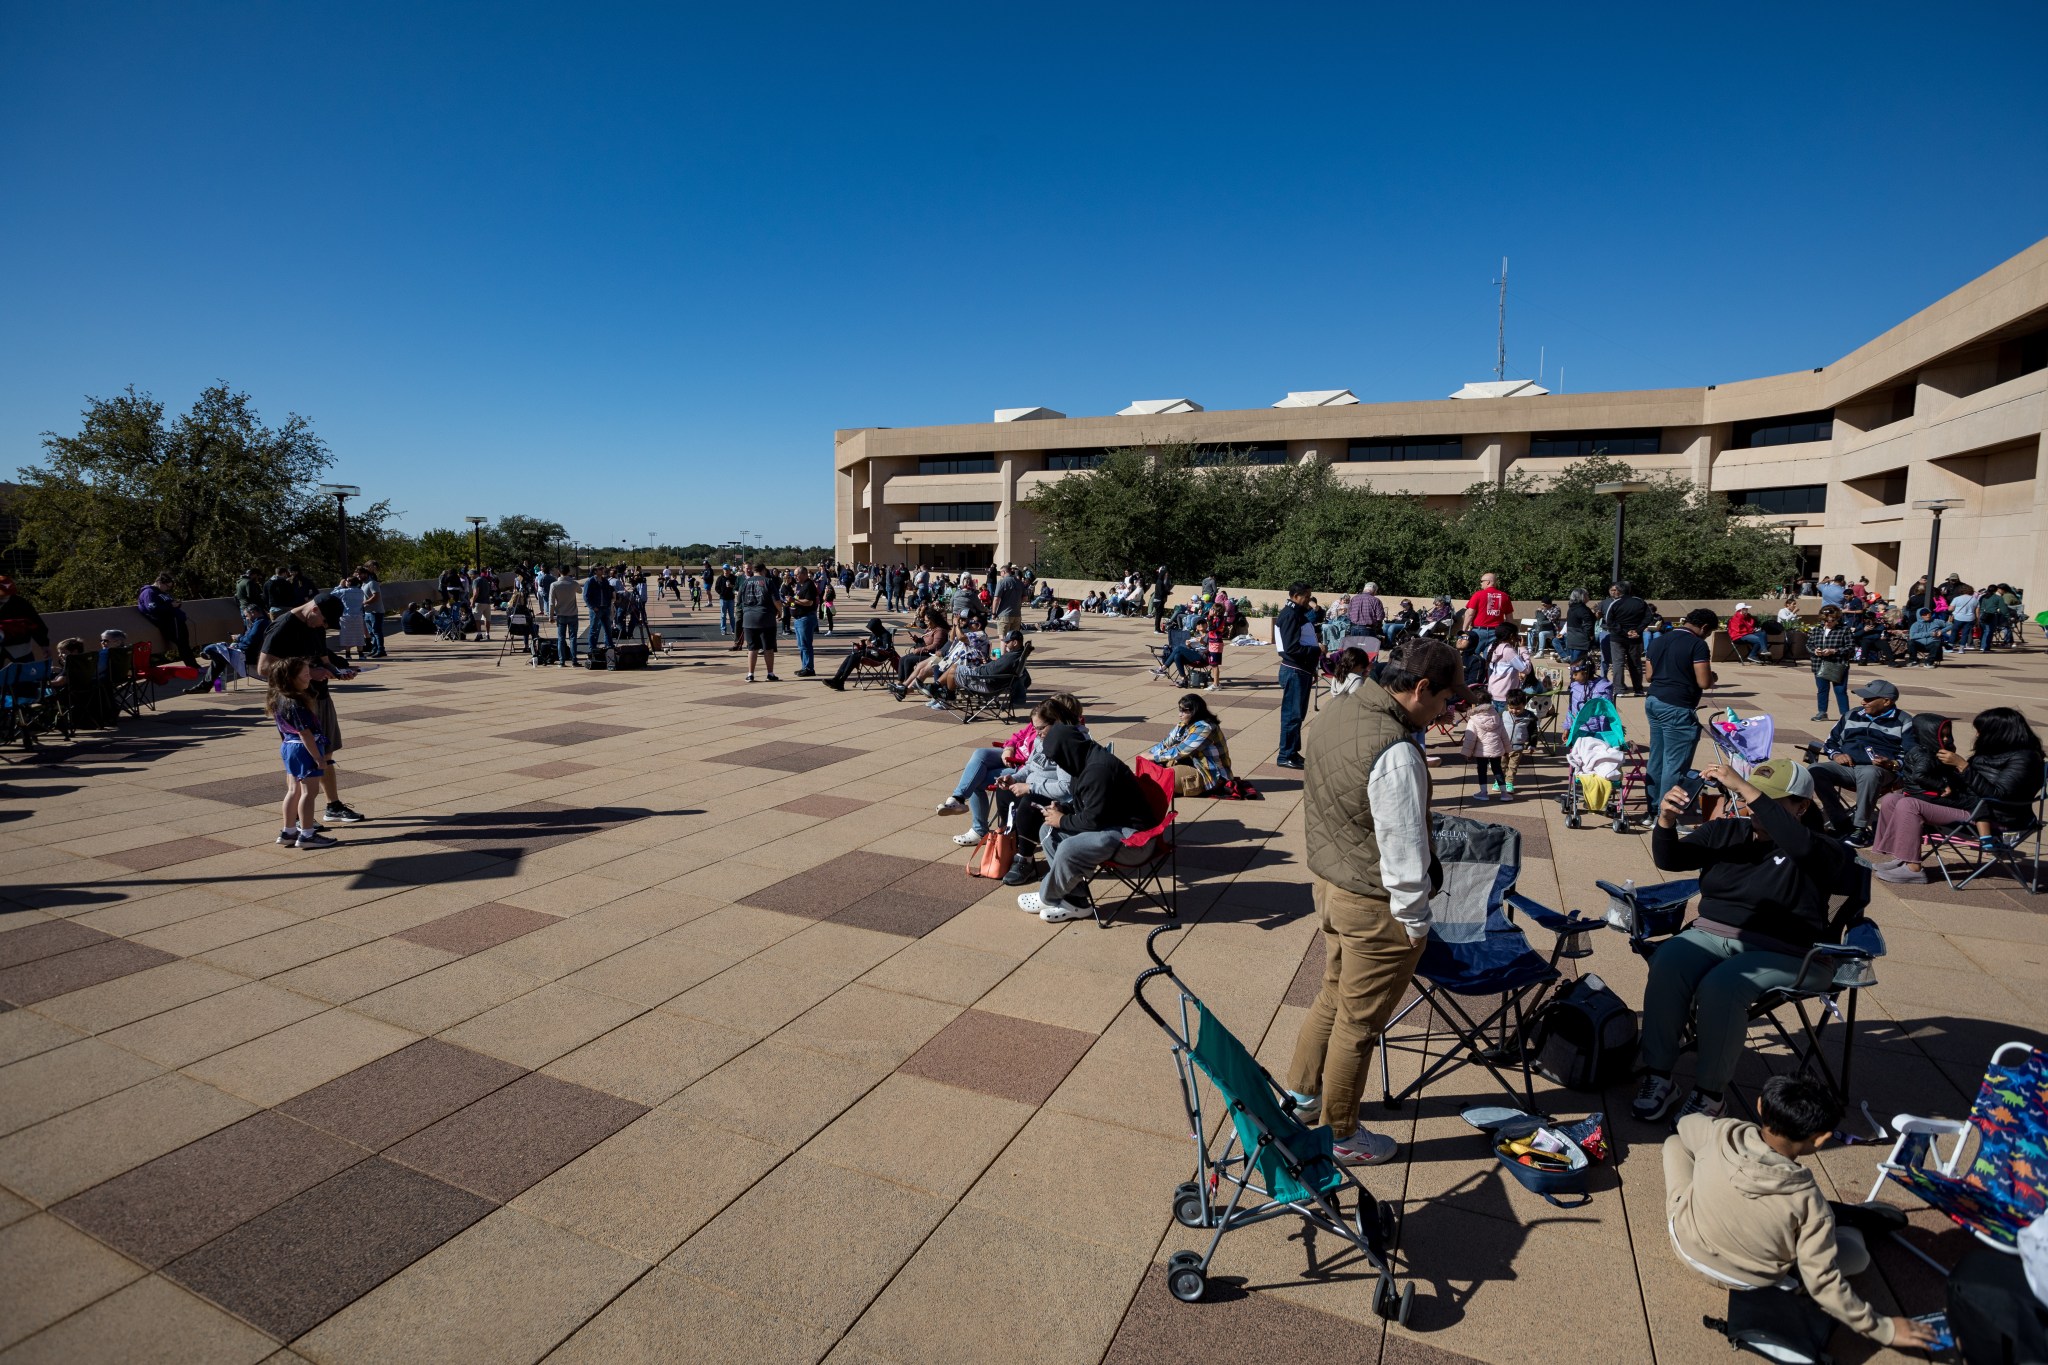 A crowd of people, including families with young children, gathers on a broad plaza paved with concrete tiles. The people are in small groups, some with lawn chairs, some sitting on the tiles. The sky is a cloudless blue.